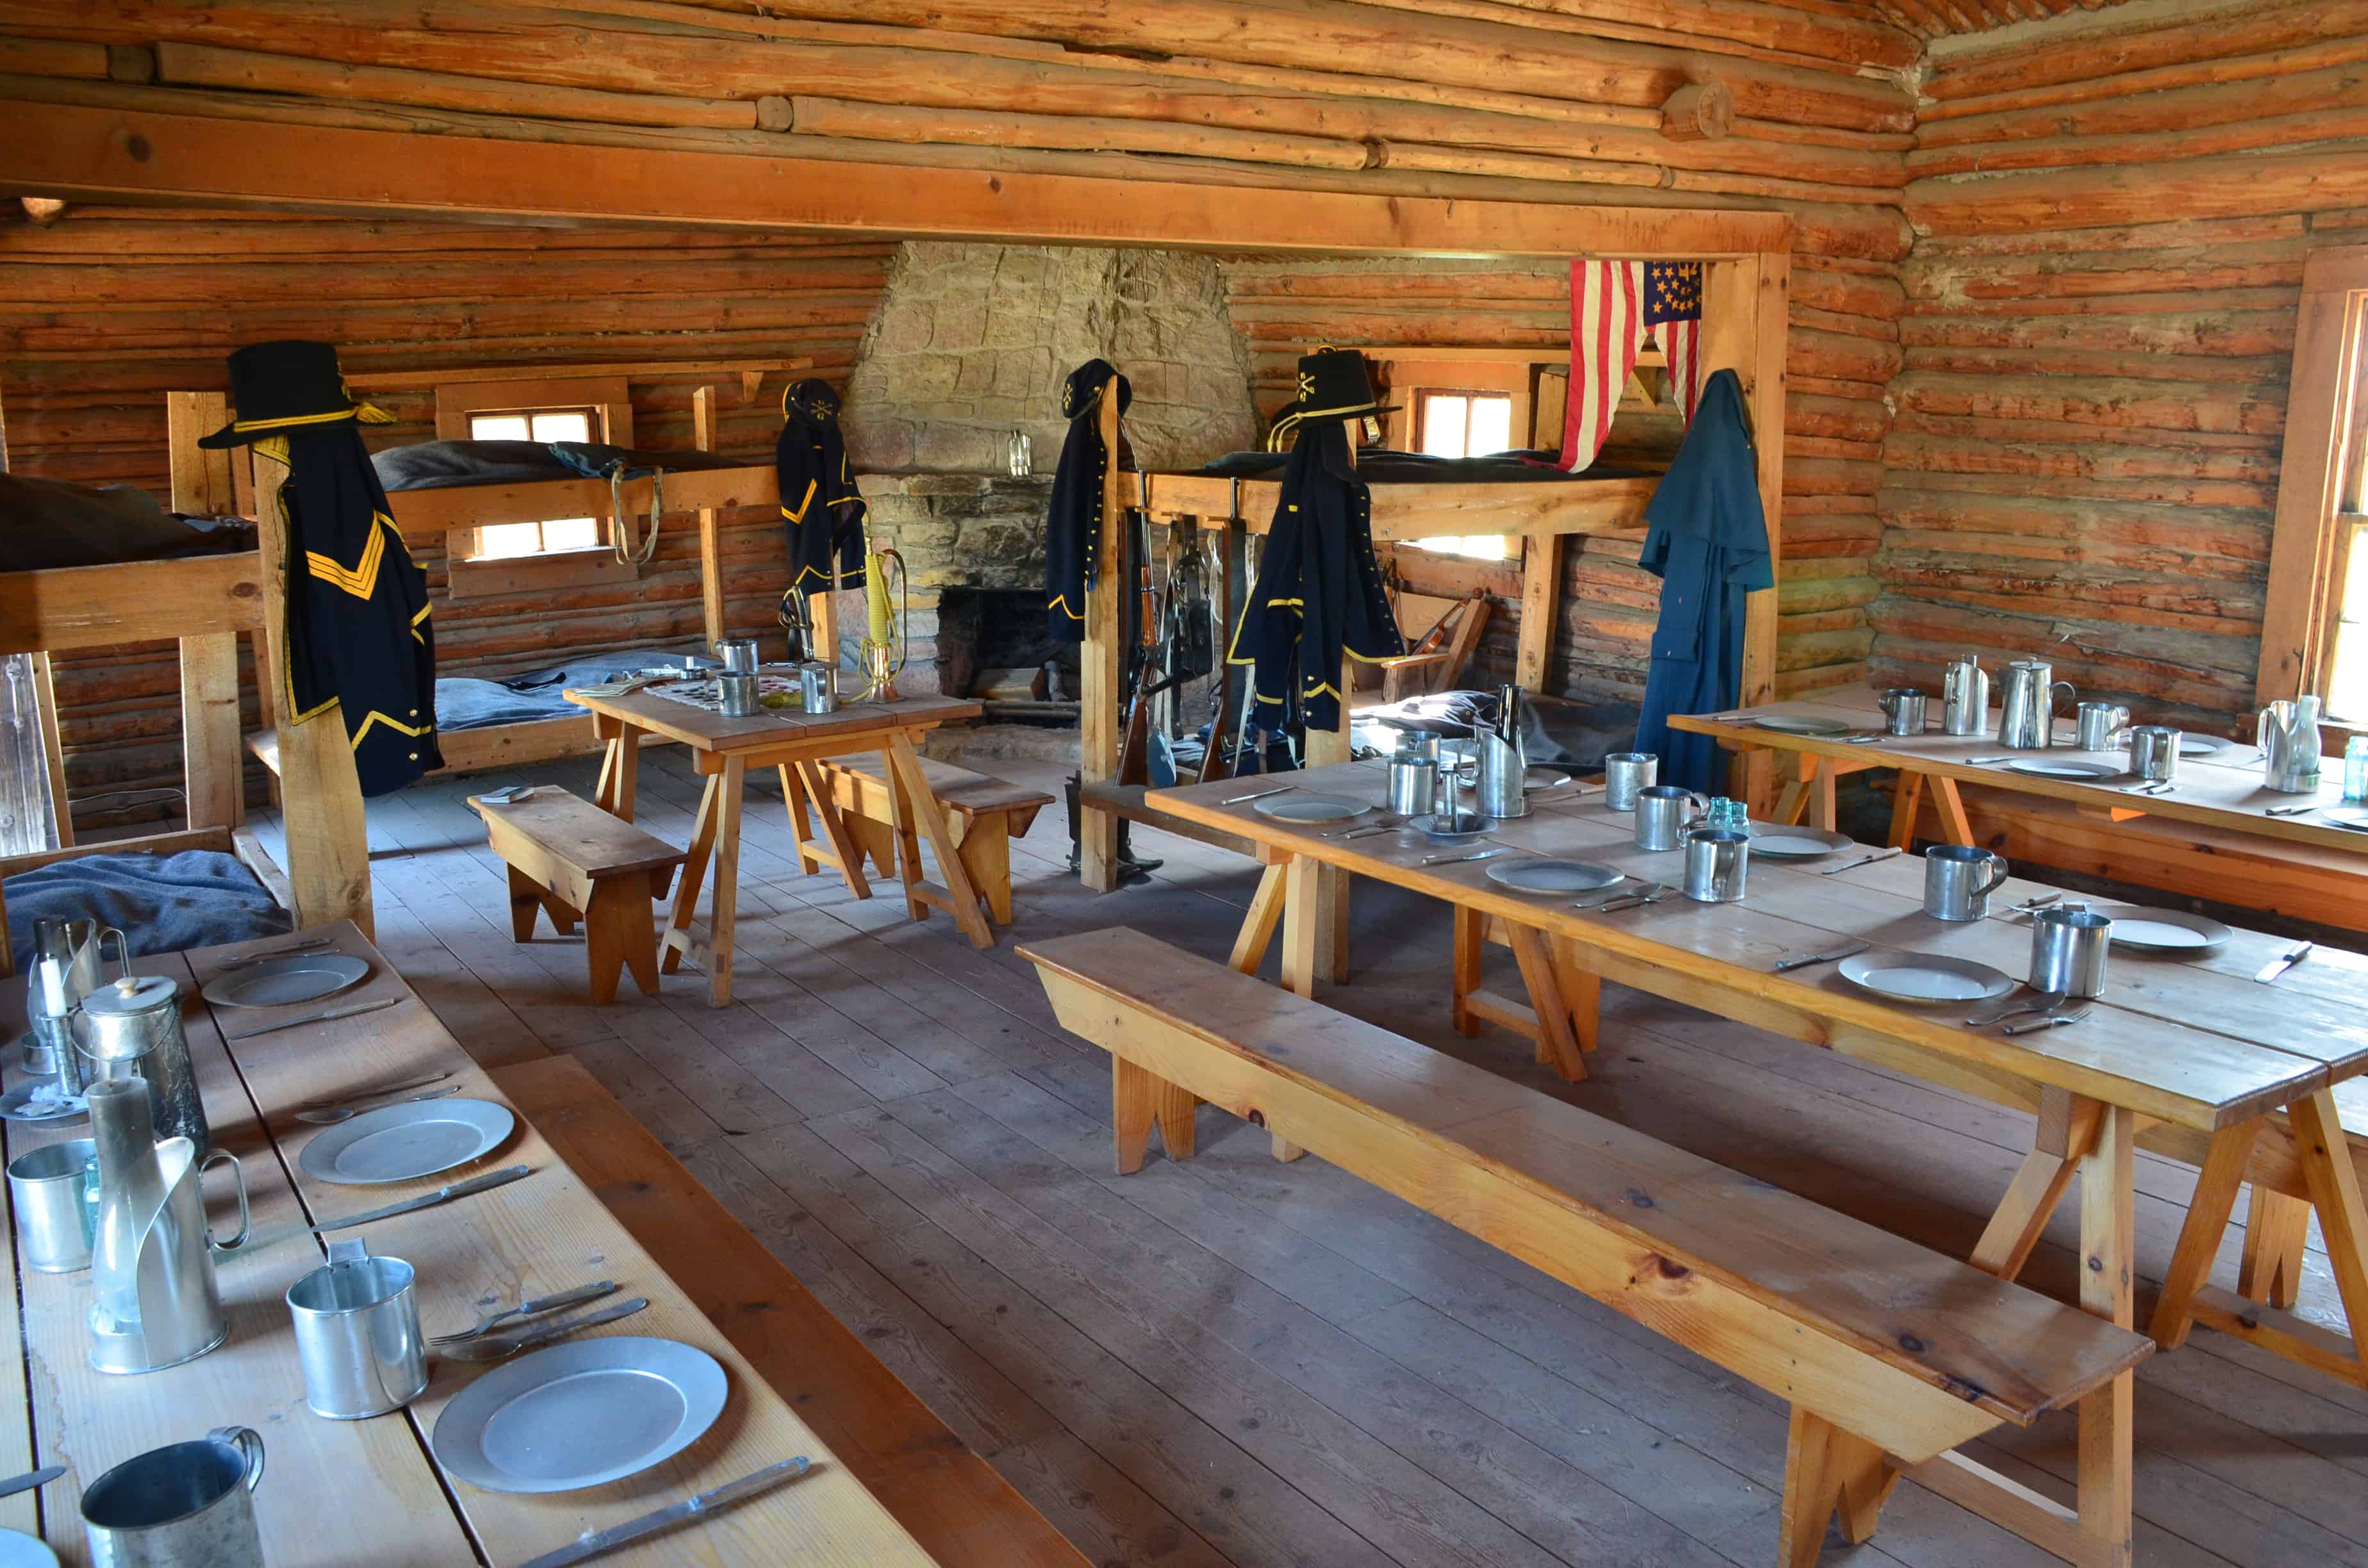 Mess hall at the replica of Fort Caspar in Casper, Wyoming